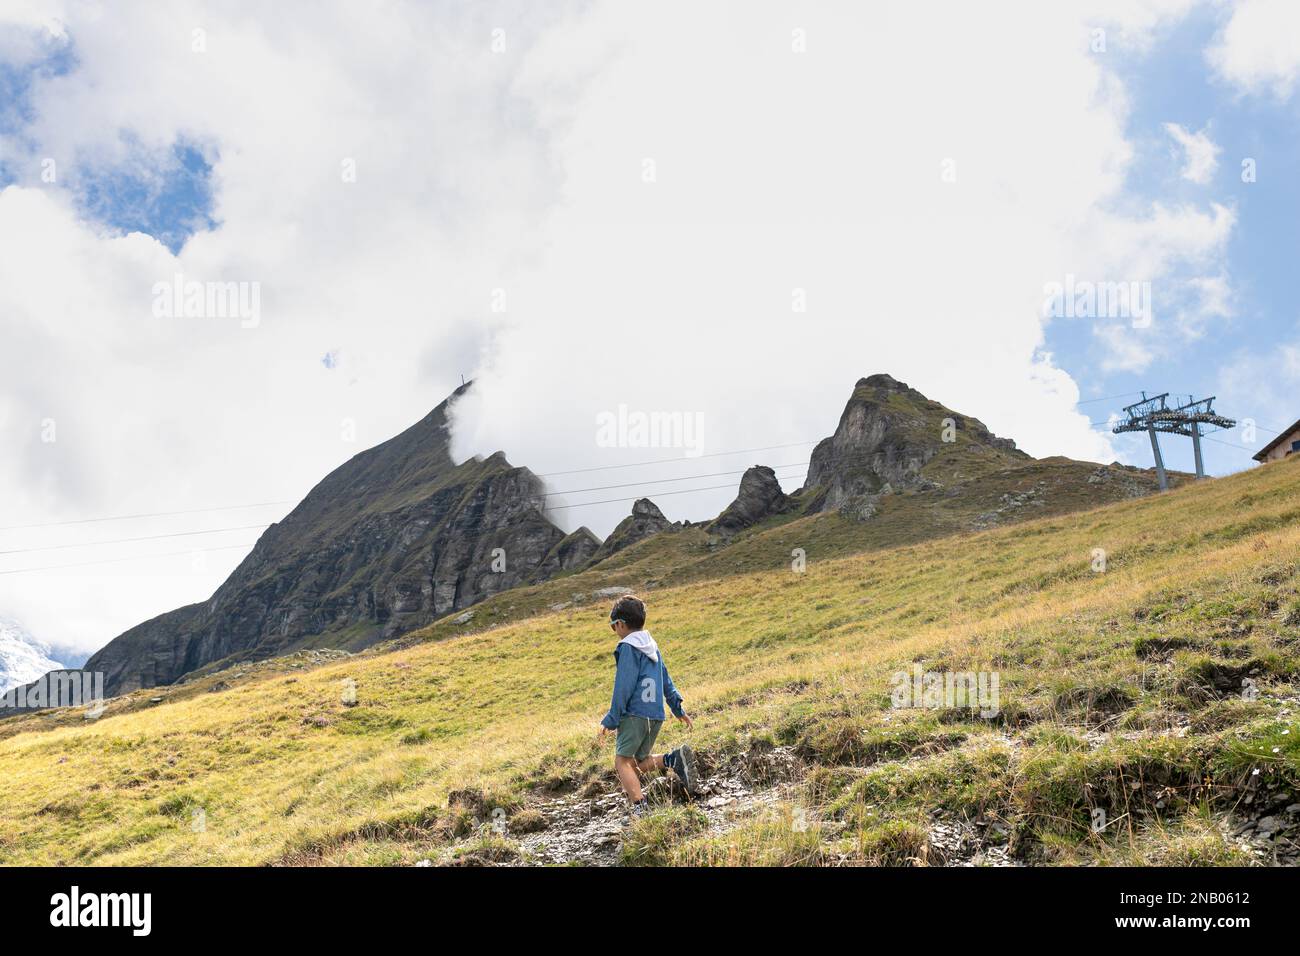 Hike trail from Mannlichen to Wengen, Switzerland alps, scene of giant cloud falling in a valley, opening mouth of the mountain. Young child walking. Stock Photo